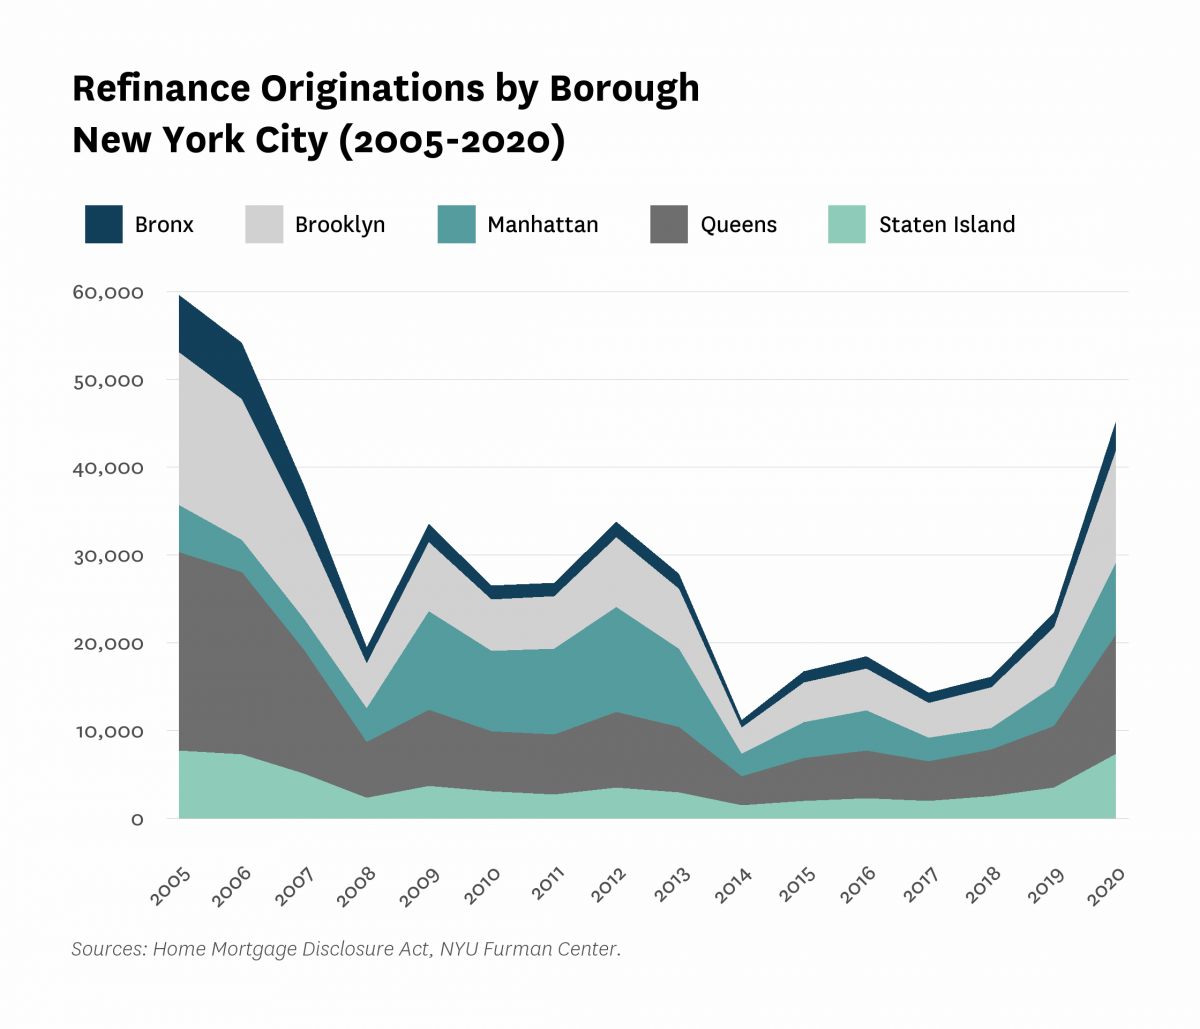 Area chart showing refinance originations by borough in New York City from 2005 to 2020.